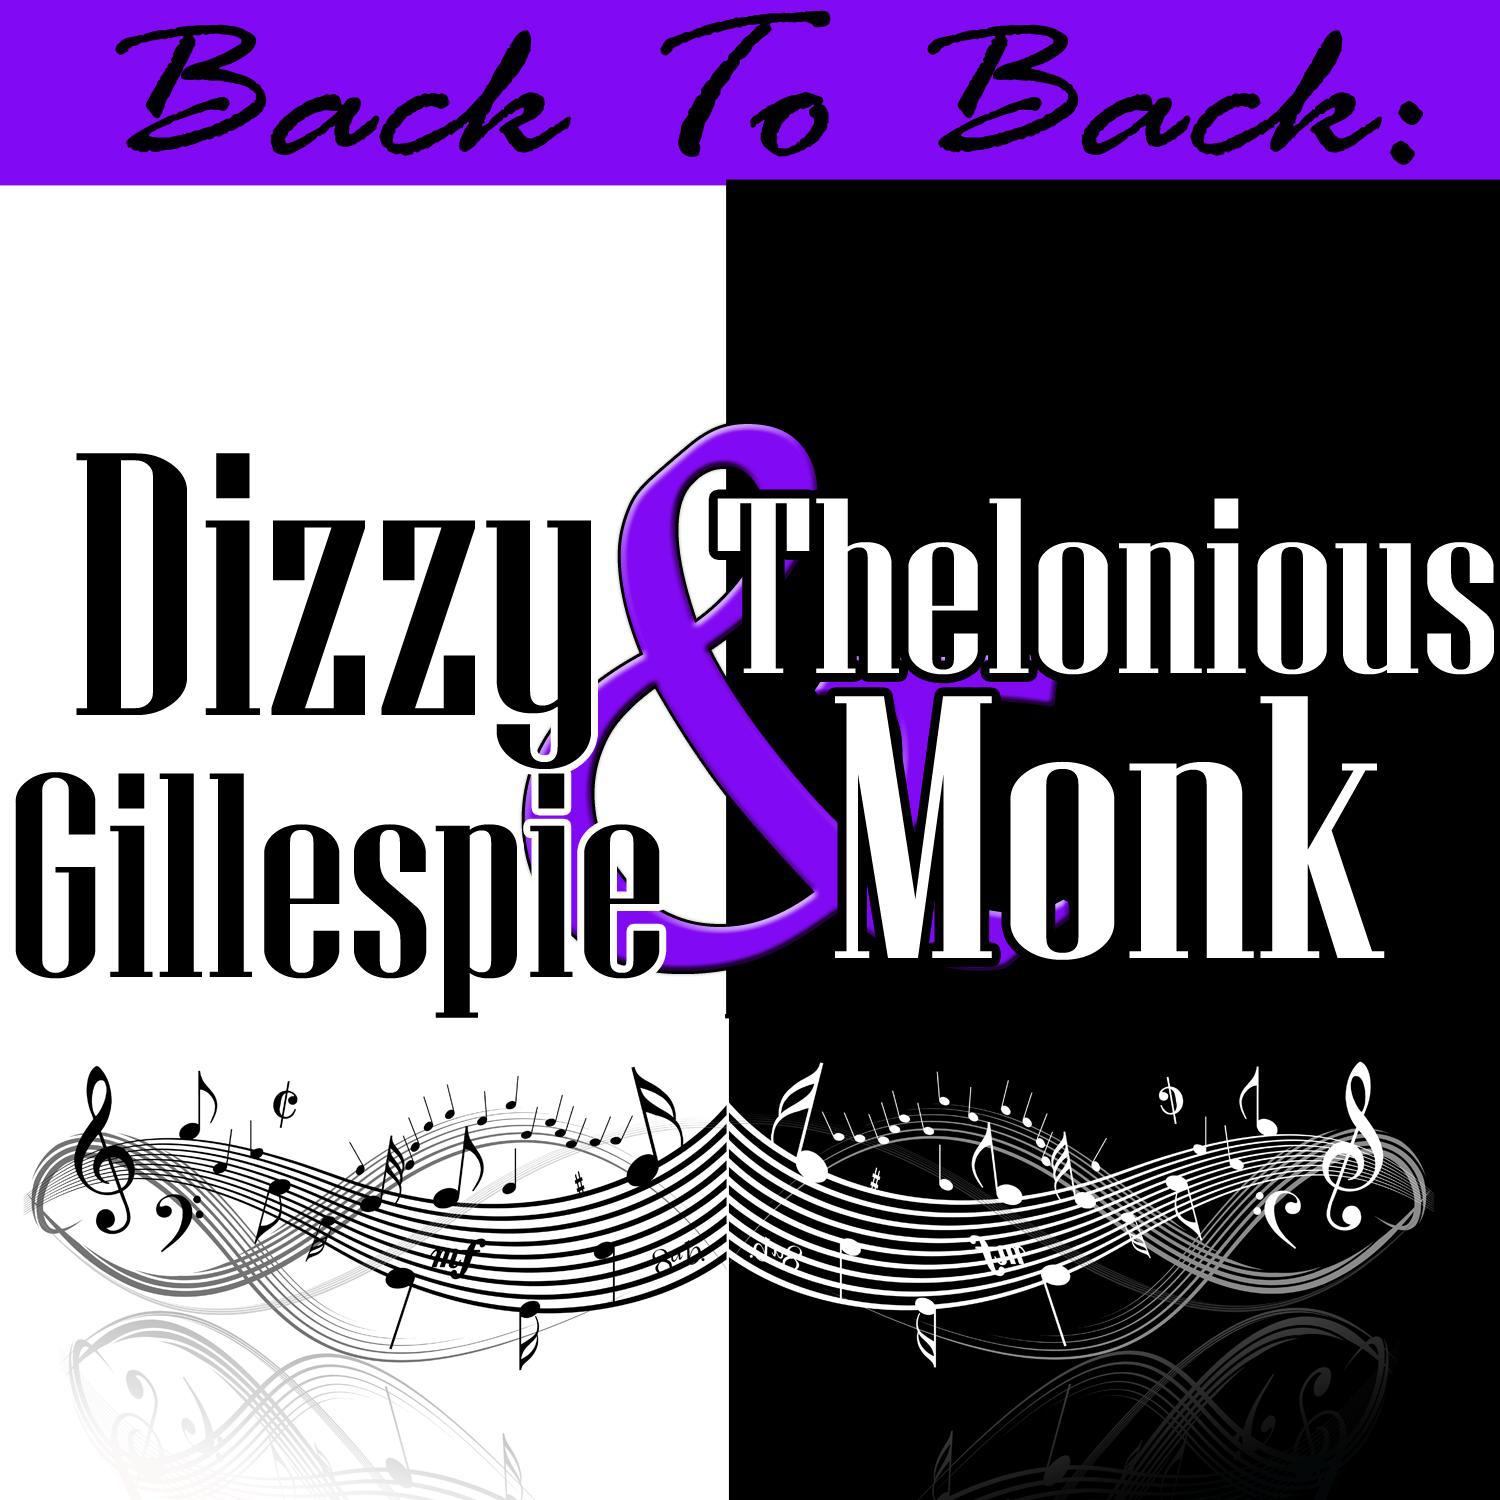 Back To Back: Dizzy Gillespie & Thelonious Monk